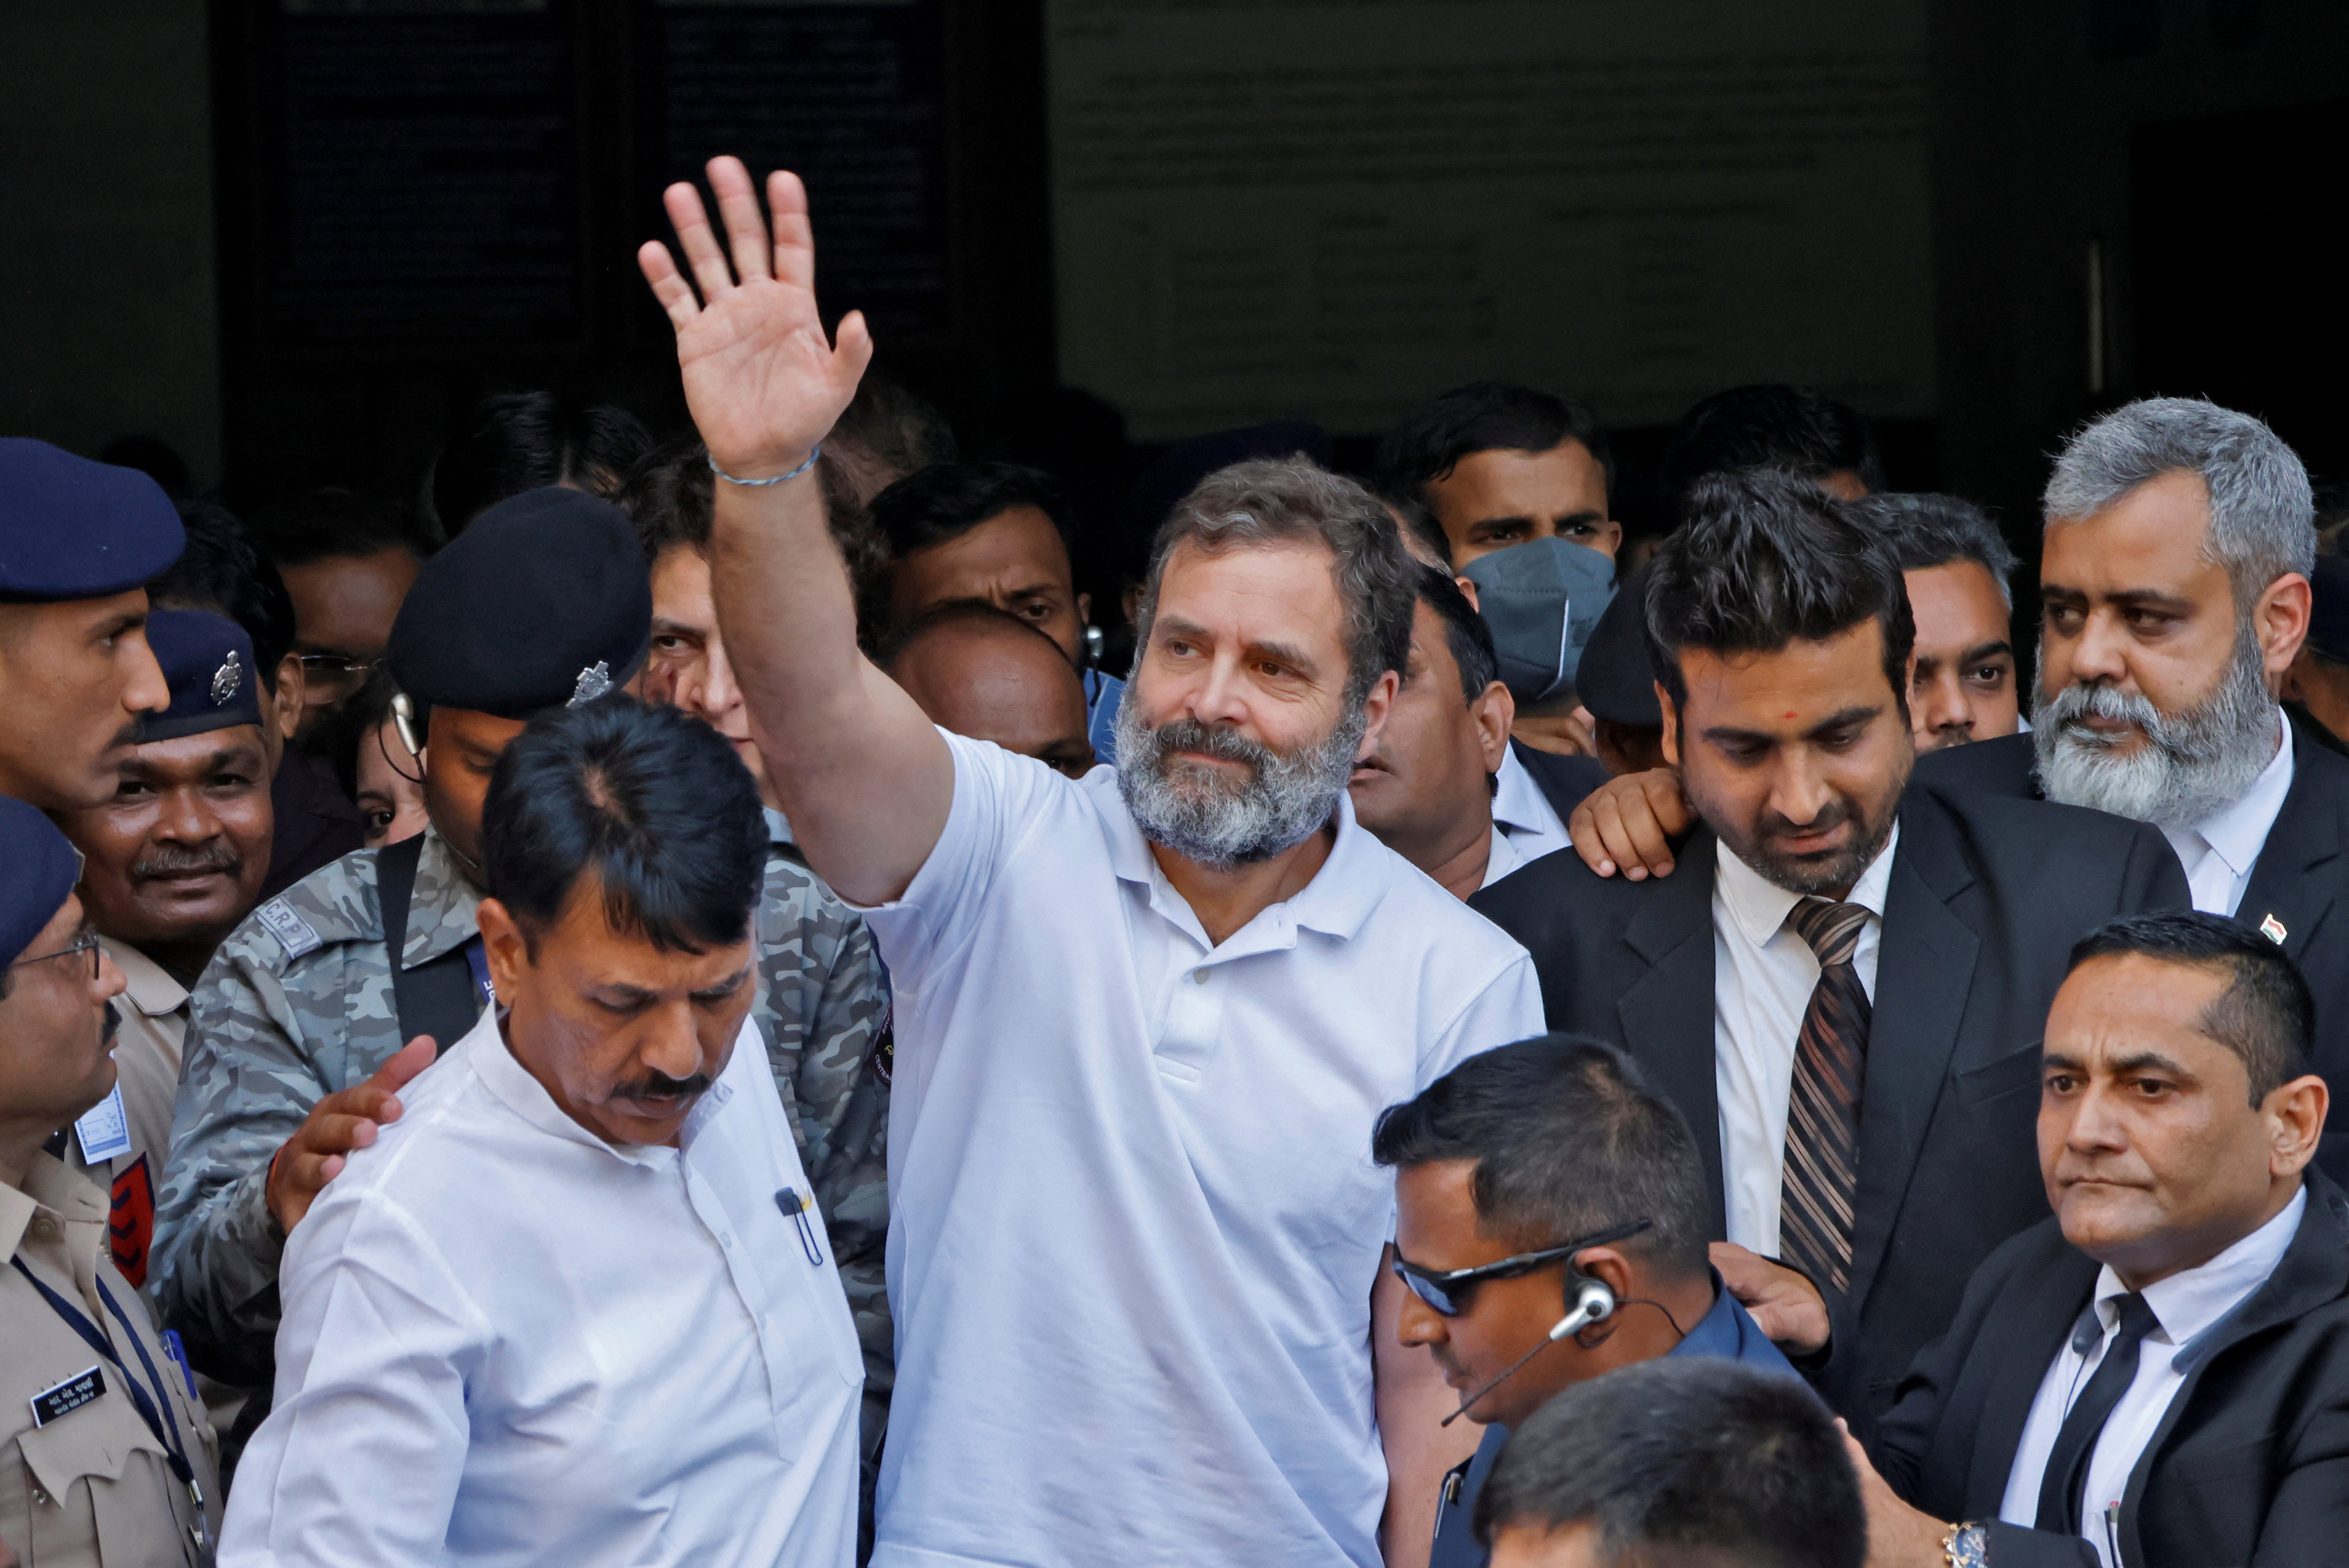 Rahul Gandhi waves as he leaves a court on Monday last week after he lodged an appeal against his conviction for criminal defamation. Photo: Reuters